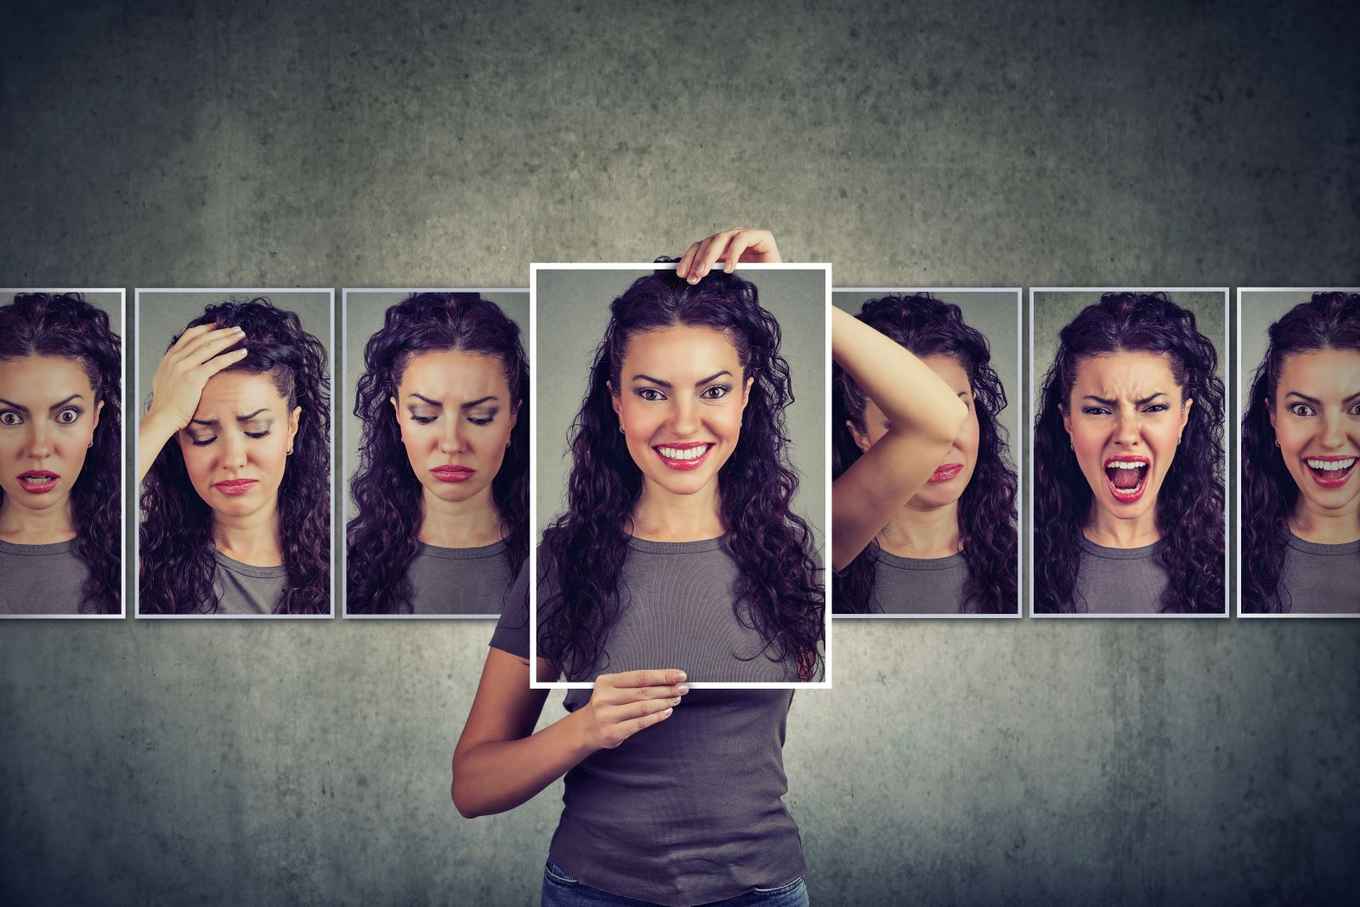 woman shows various emotions with her face